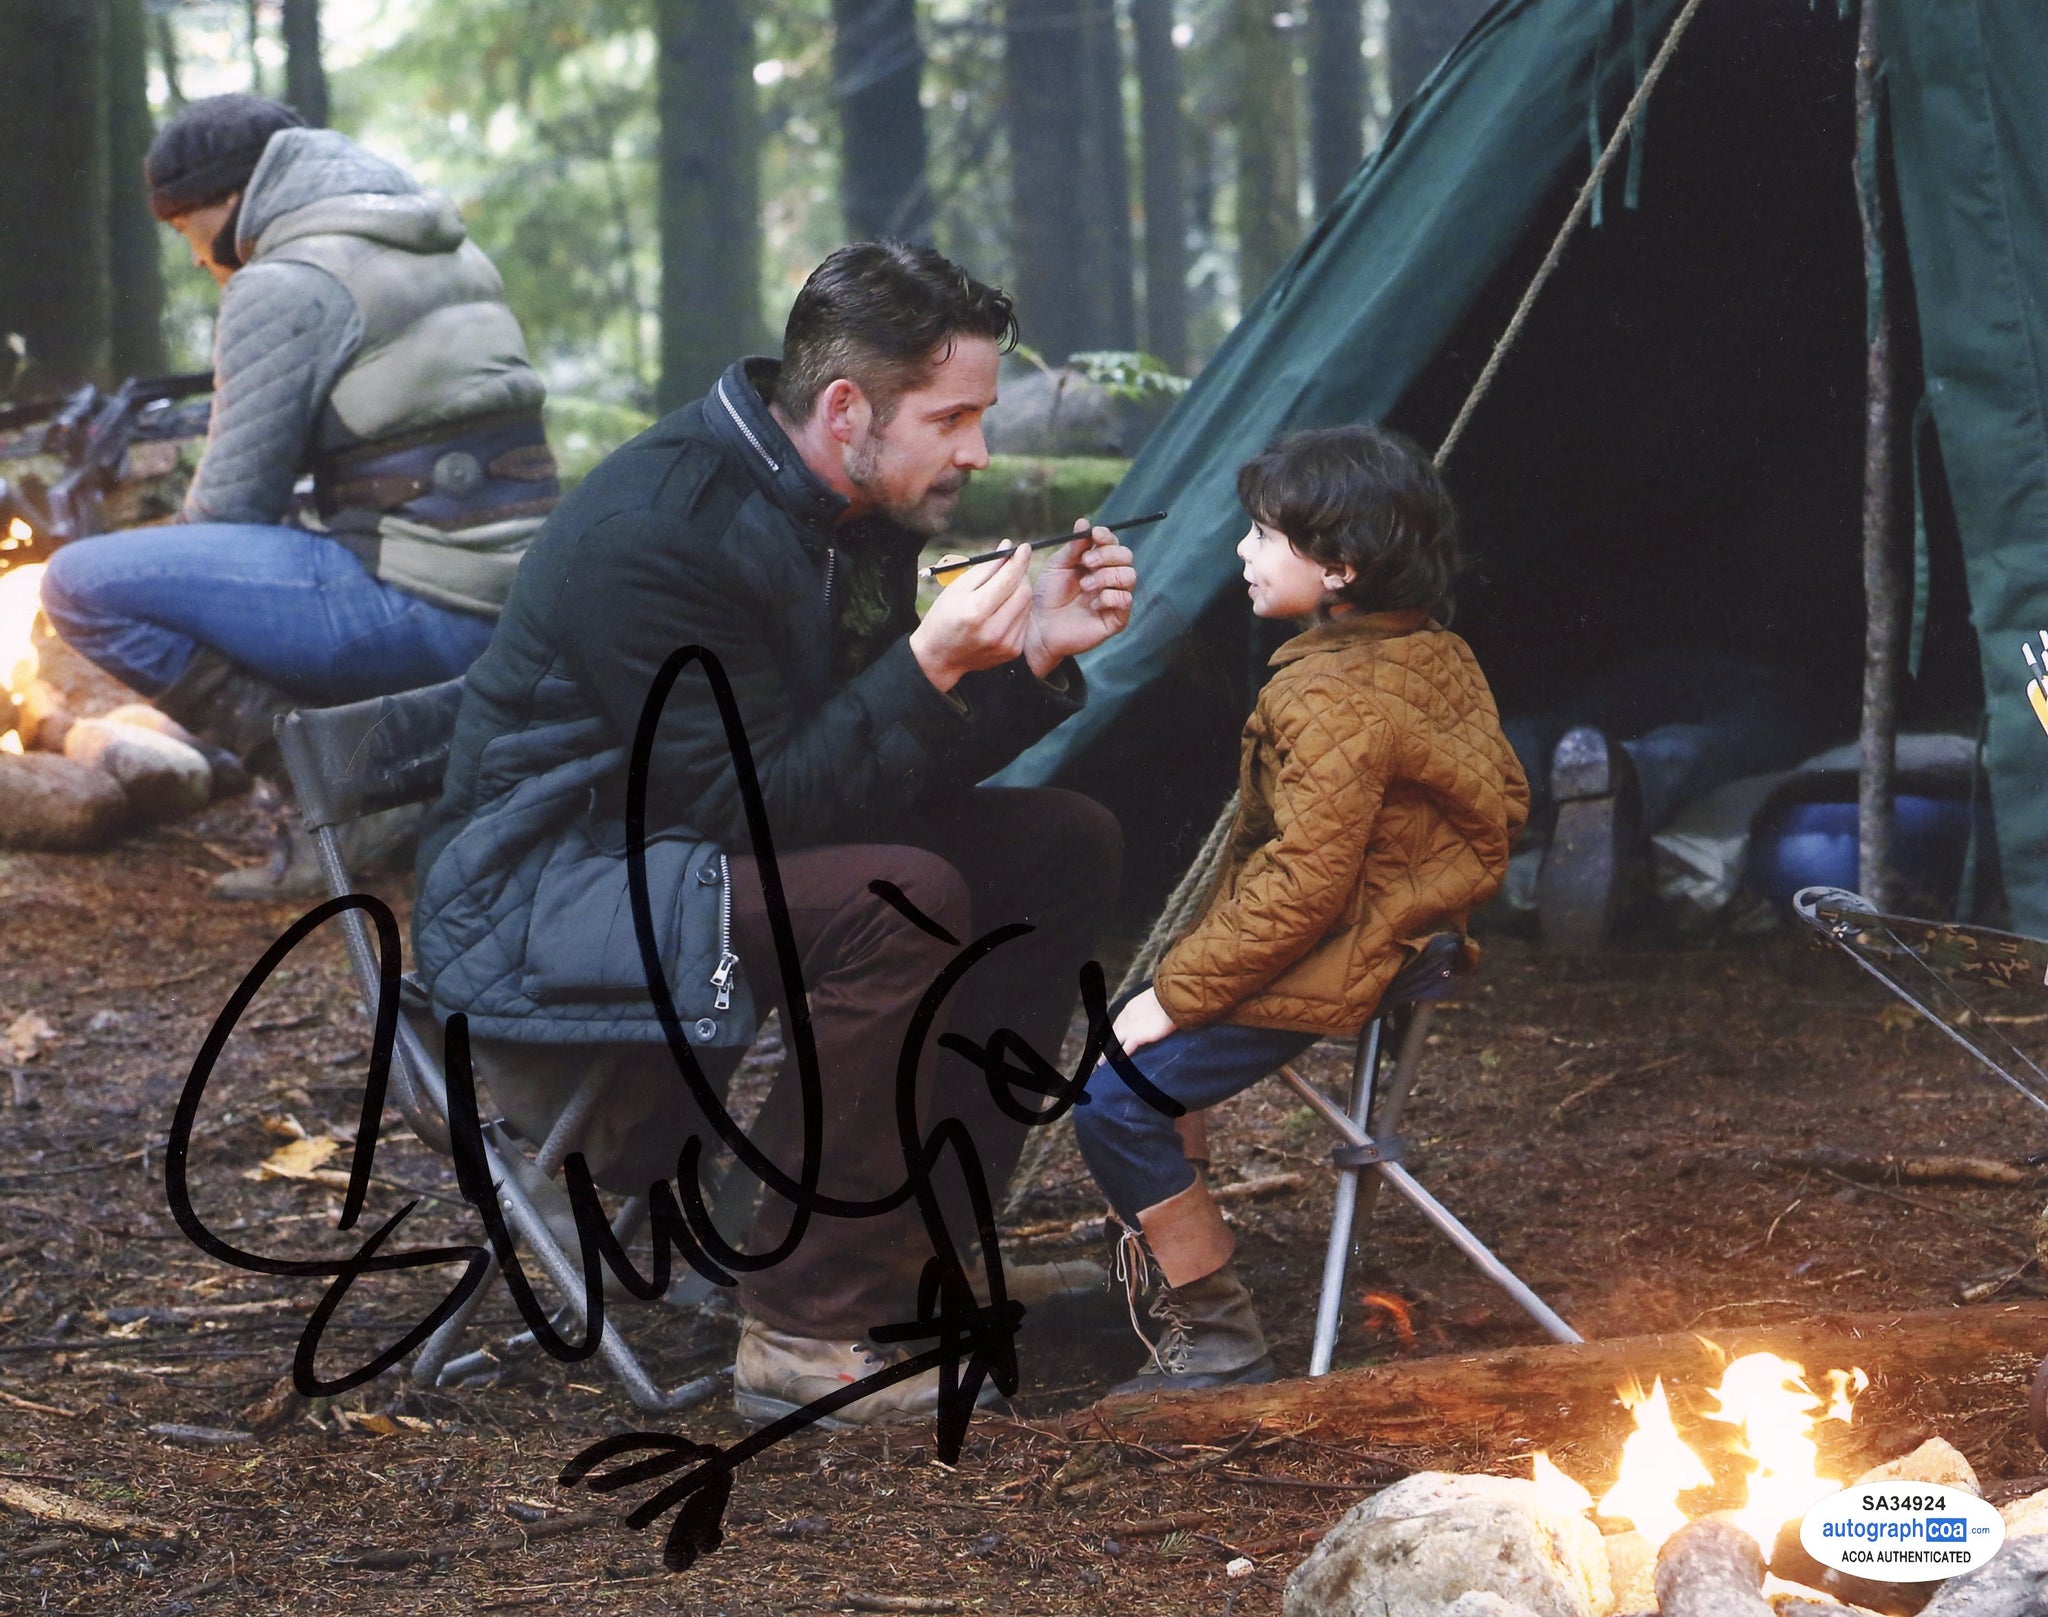 Sean Maguire Hot Once Upon A Time Robin Hood Signed Autograph 8x10 Photo ACOA #7 - Outlaw Hobbies Authentic Autographs